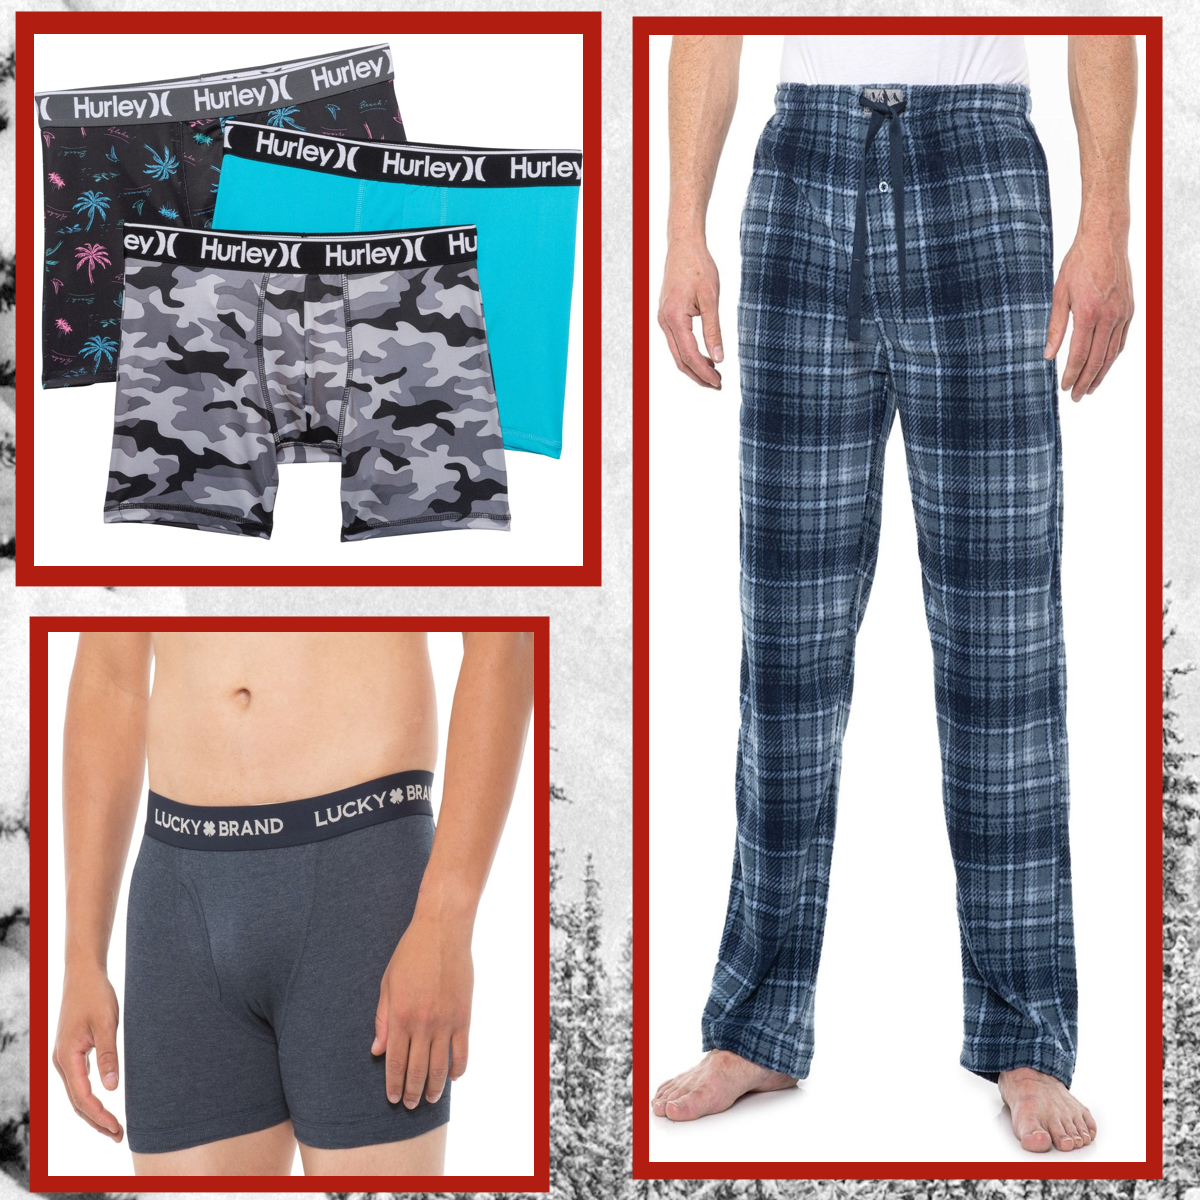 Lucky Brand Men's 3-Pack Cotton Boxer Briefs (XL), 3-Pack Hurley Regrind Boxer Briefs, or Plaid Fleece PJ Pants $10 at Sierra + Free Store Pickup